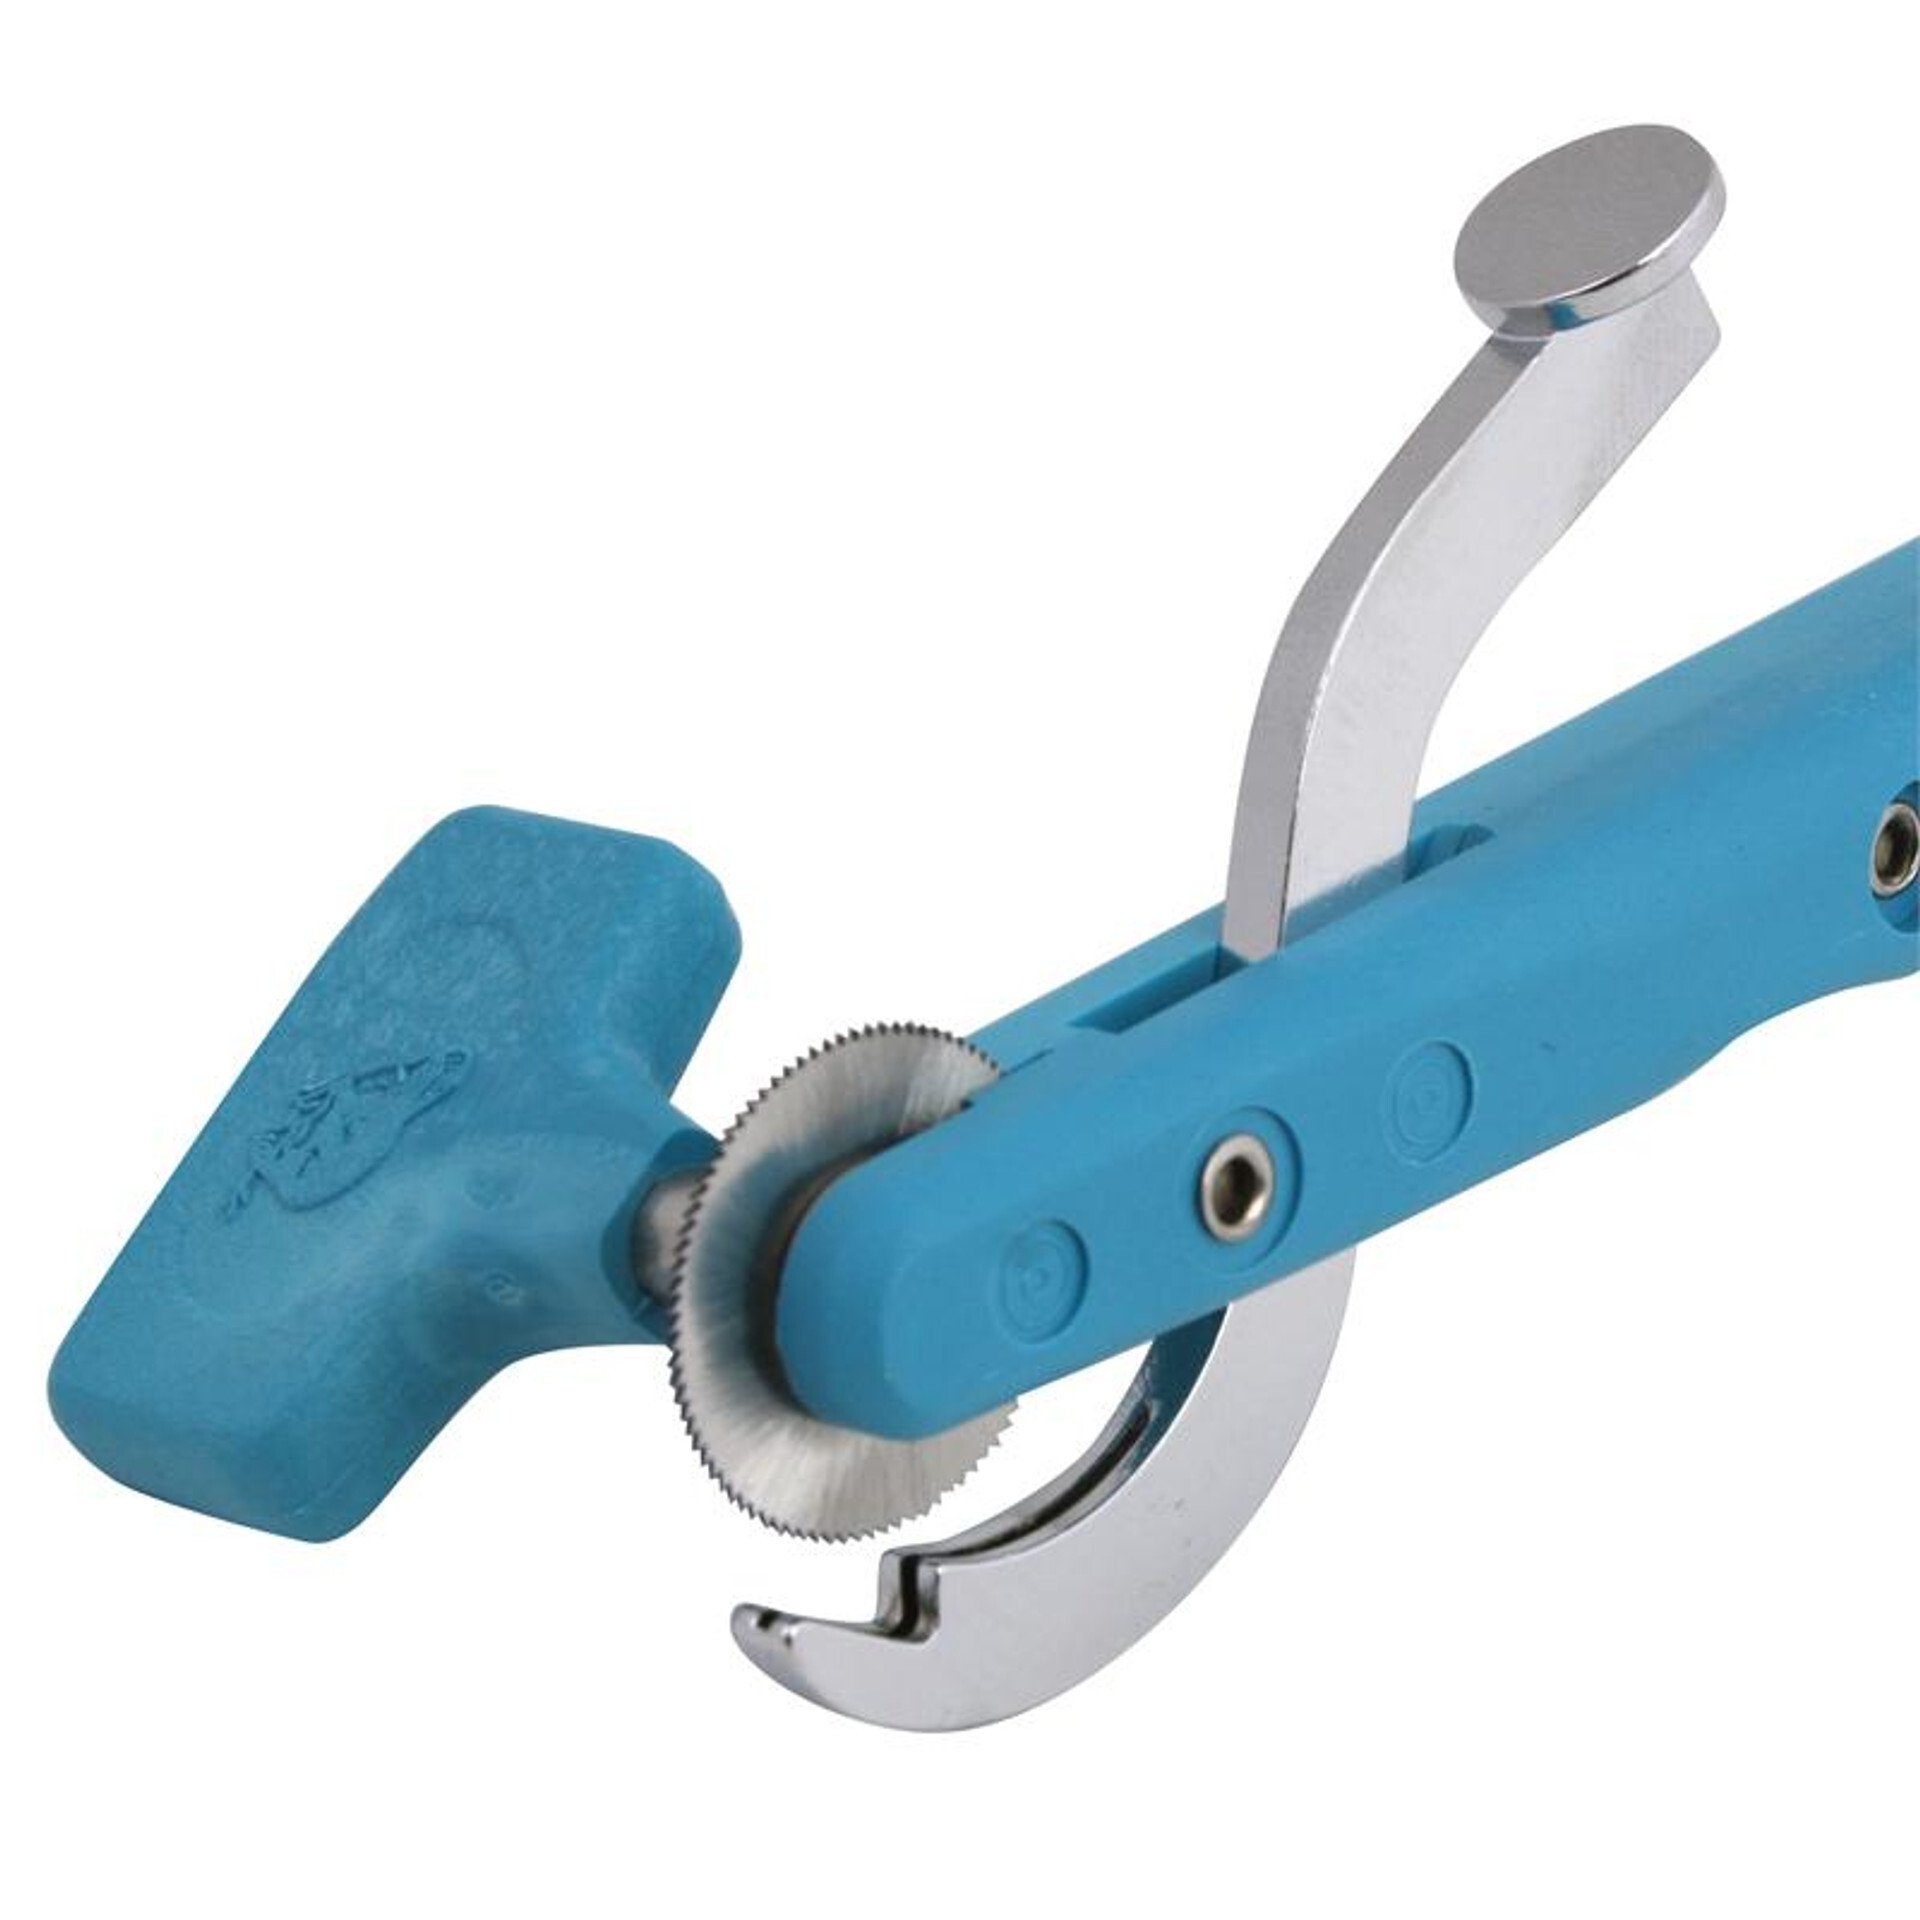 Picture of a pizza-cutter like implement with an arm underneath the serrated cutting wheel.